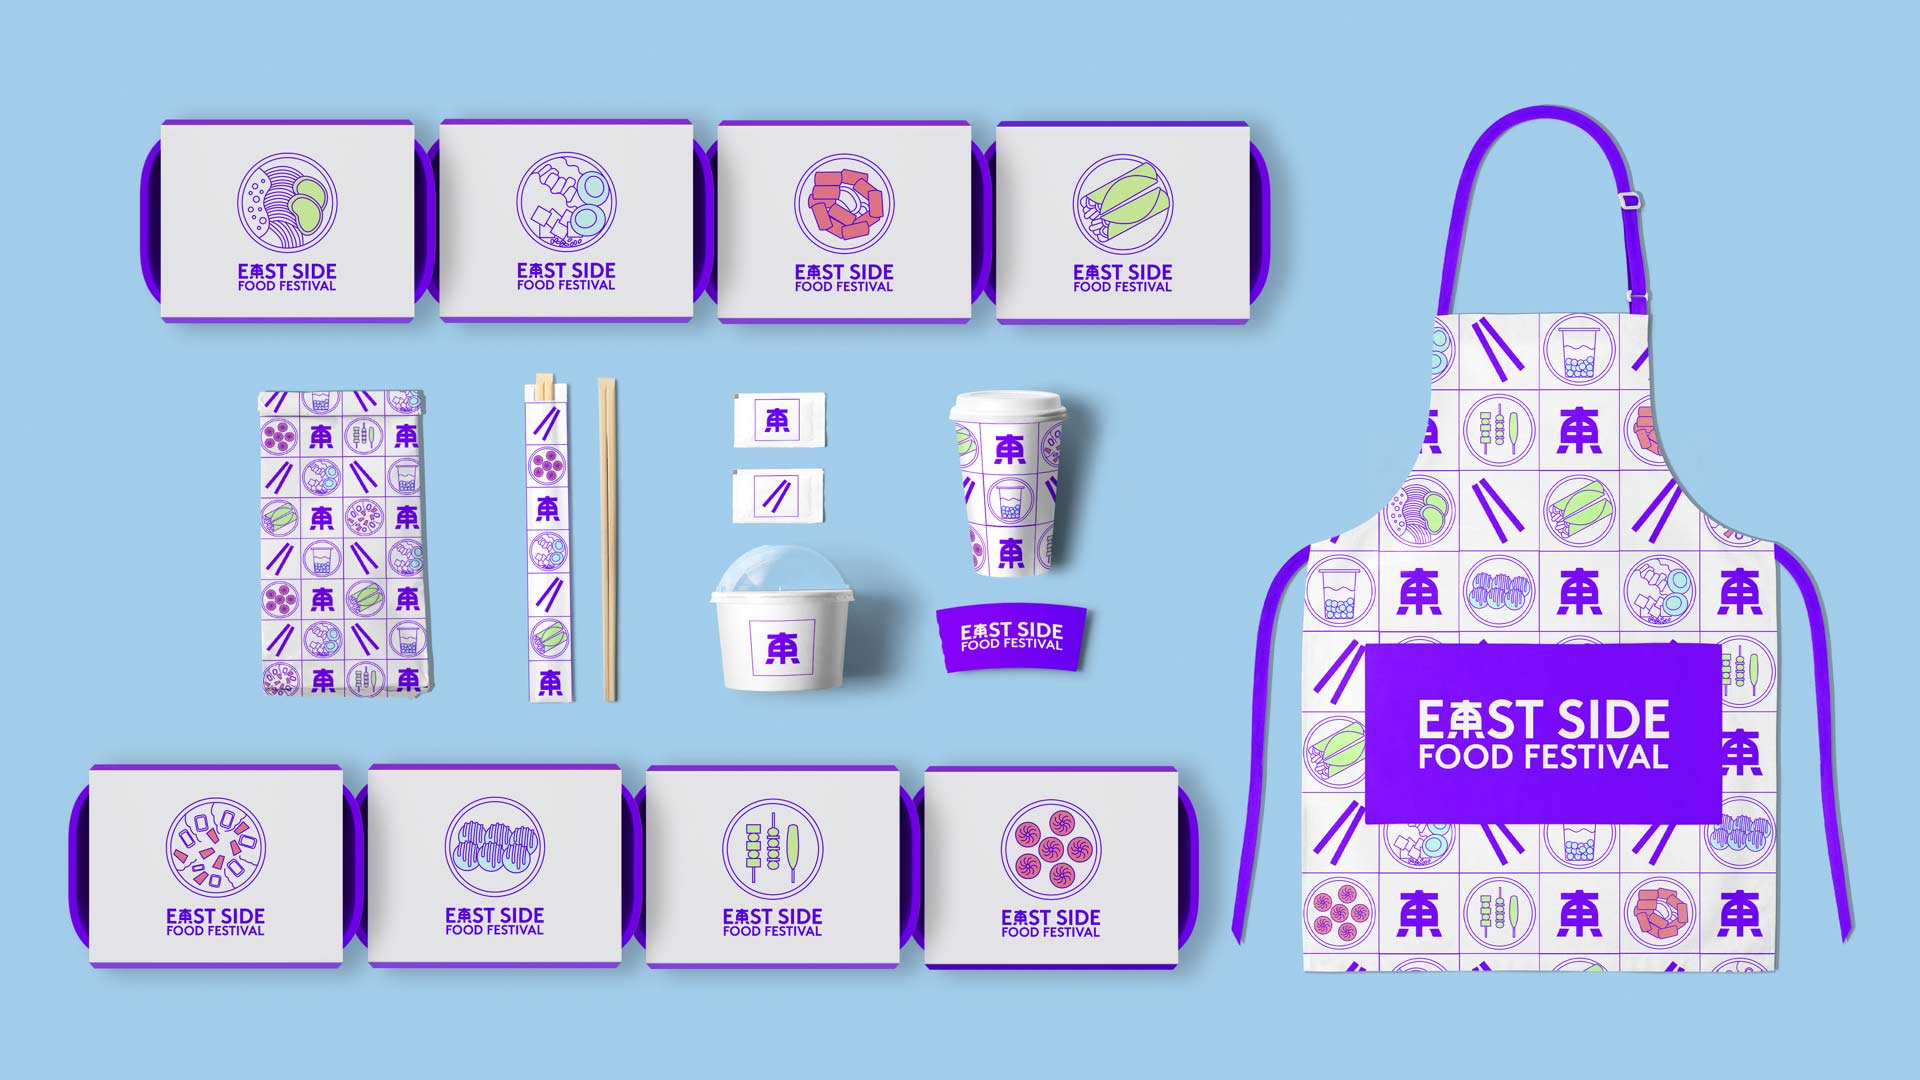 East Side Food Festival branding; apron, cups, chopsticks, boxes and merch